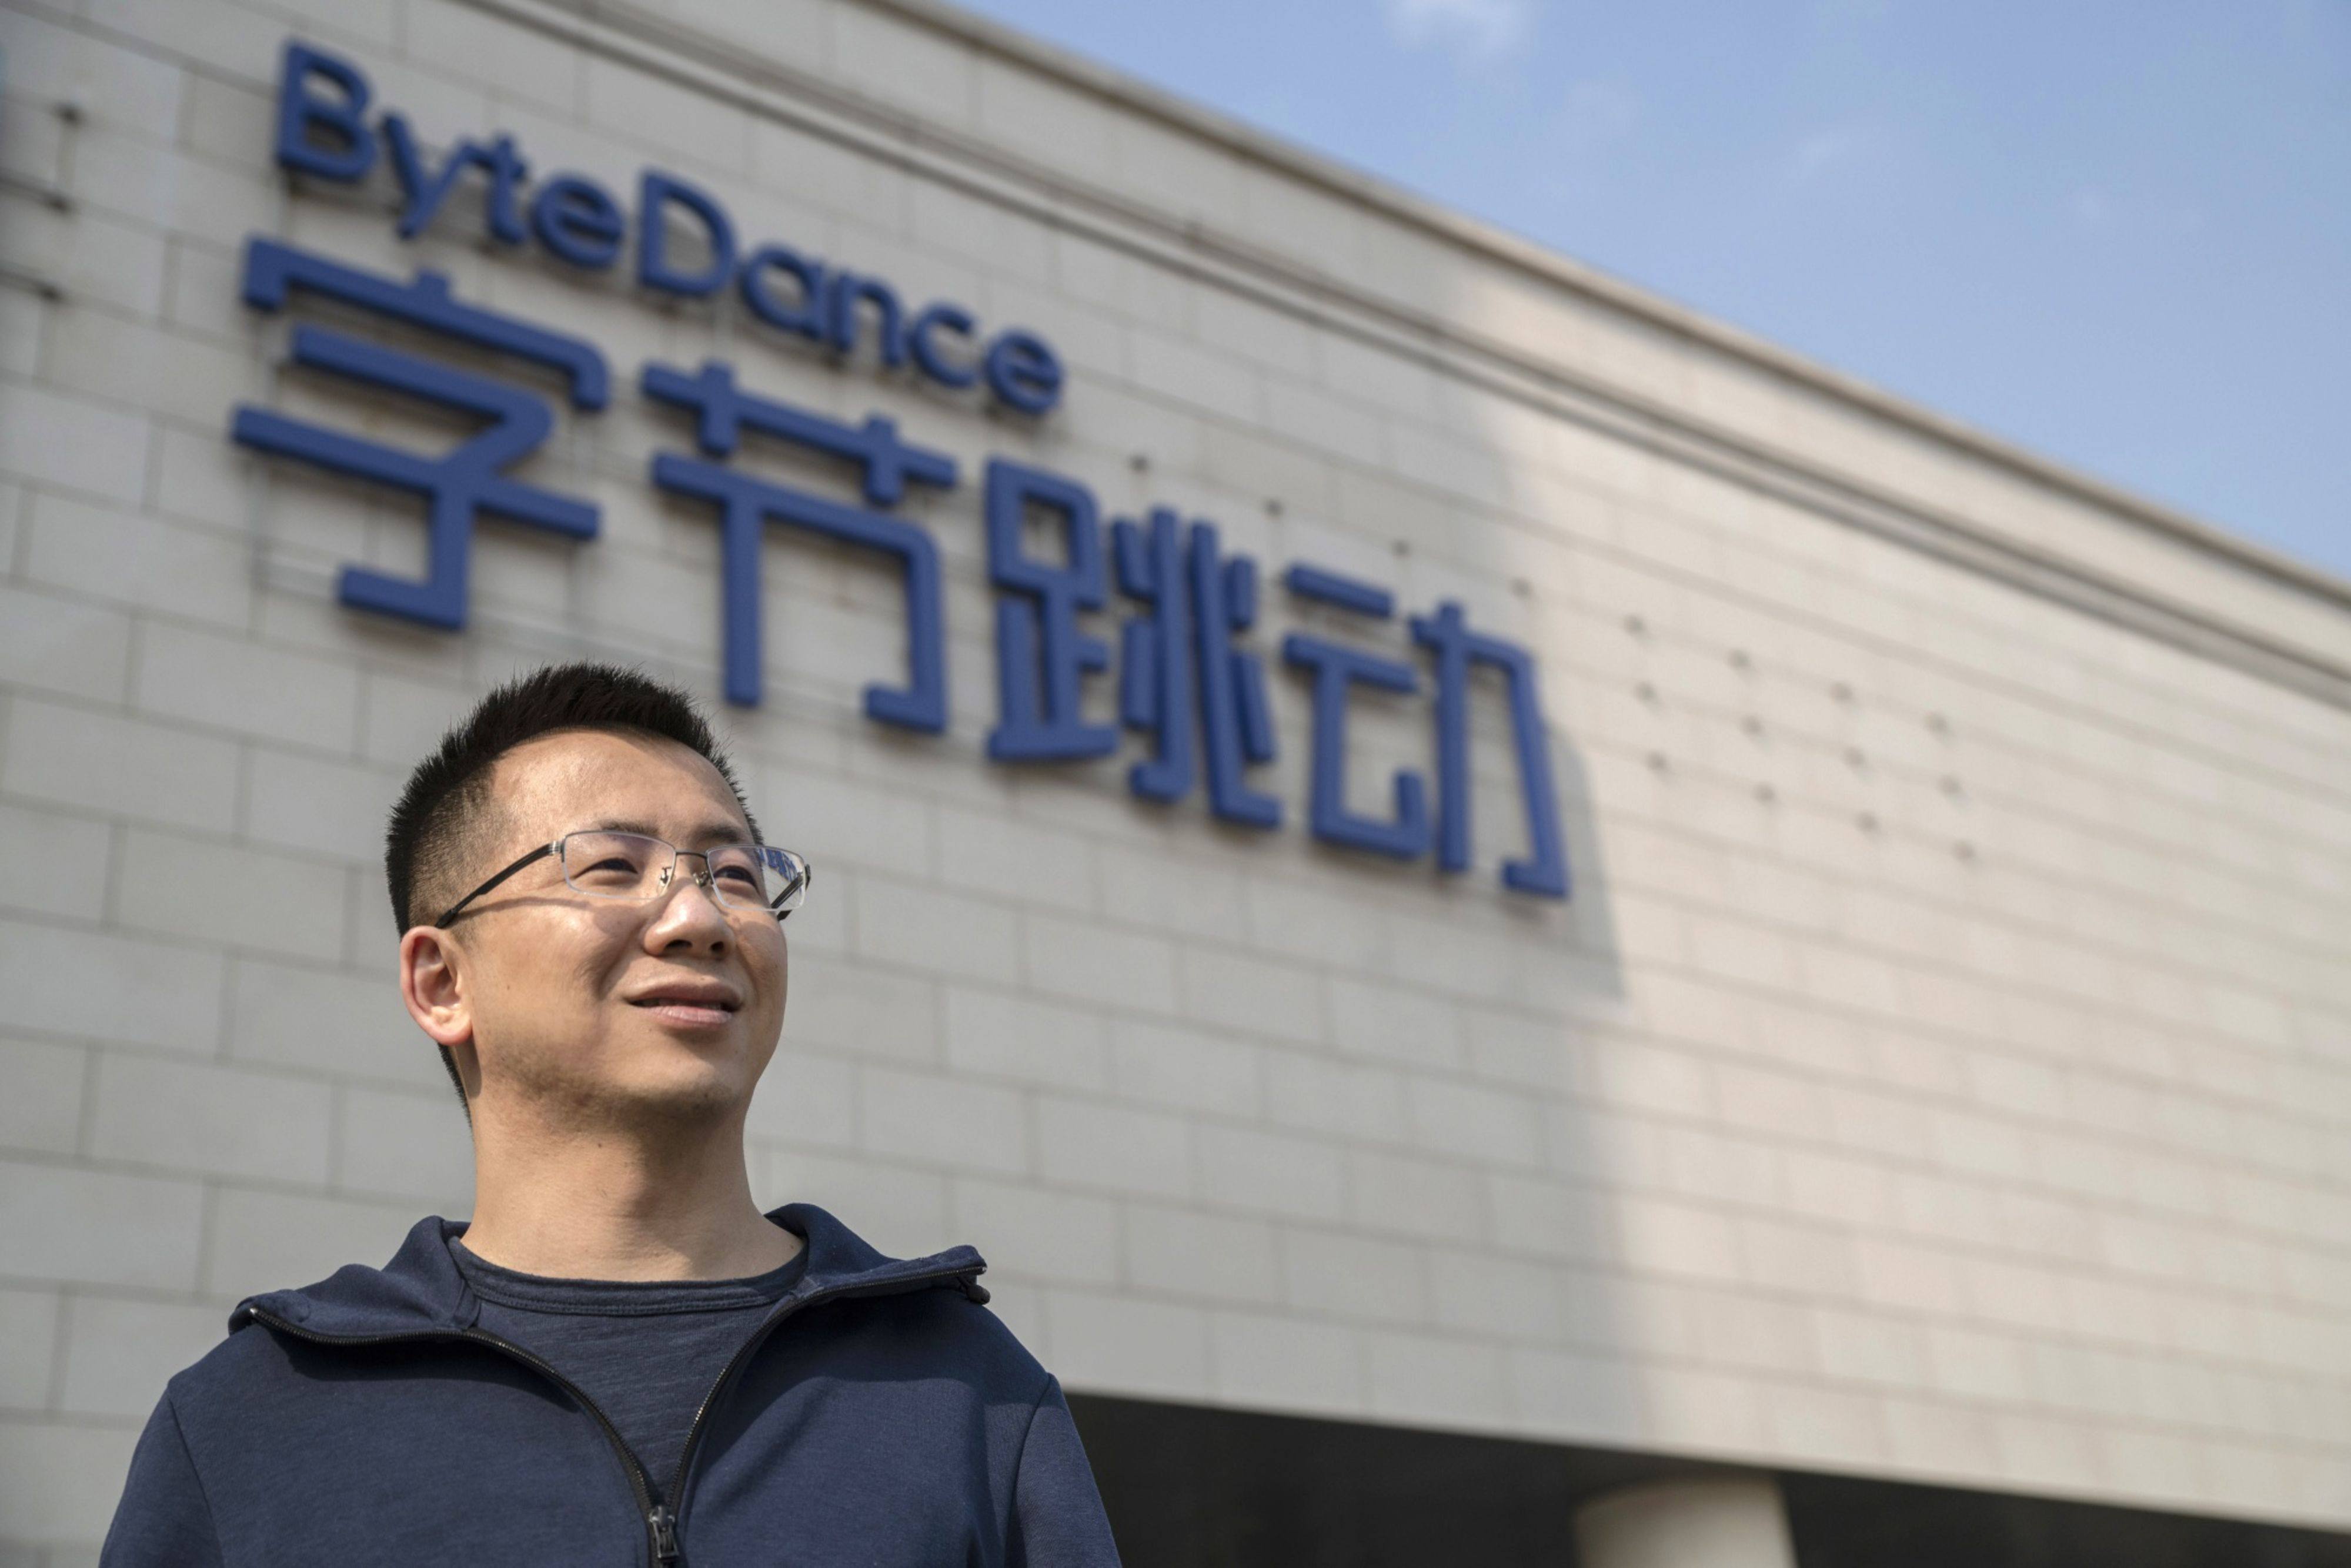 Zhang Yiming, founder and former CEO of ByteDance, poses for a photo in Beijing in 2019. Photo: Bloomberg